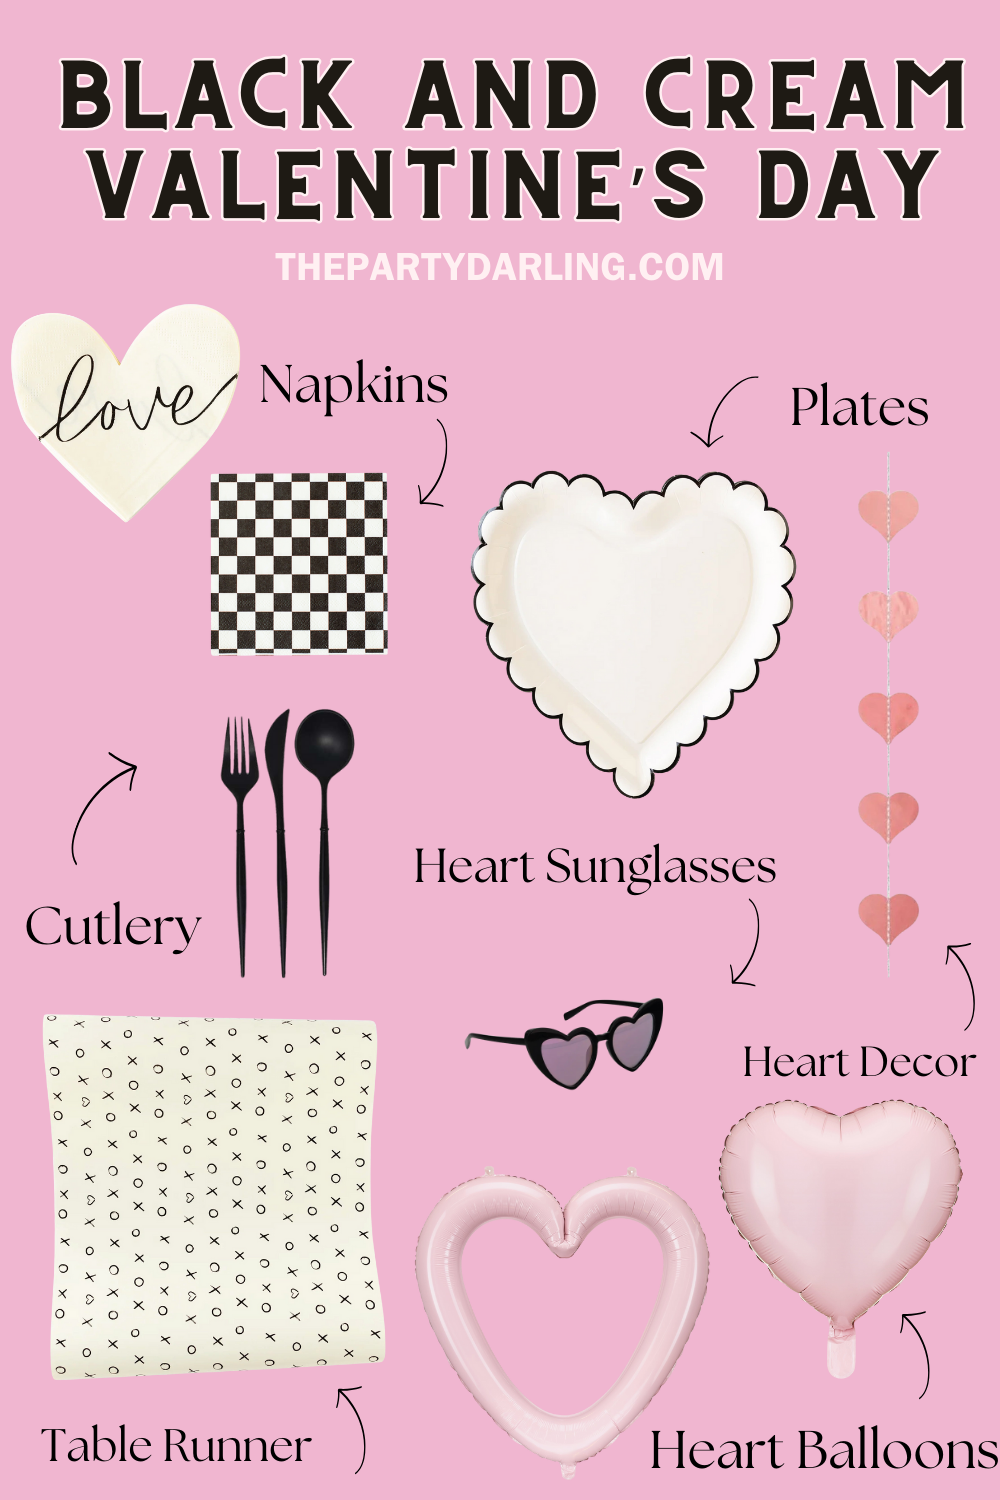 Black and Cream Valentine's Day | The Party Darling